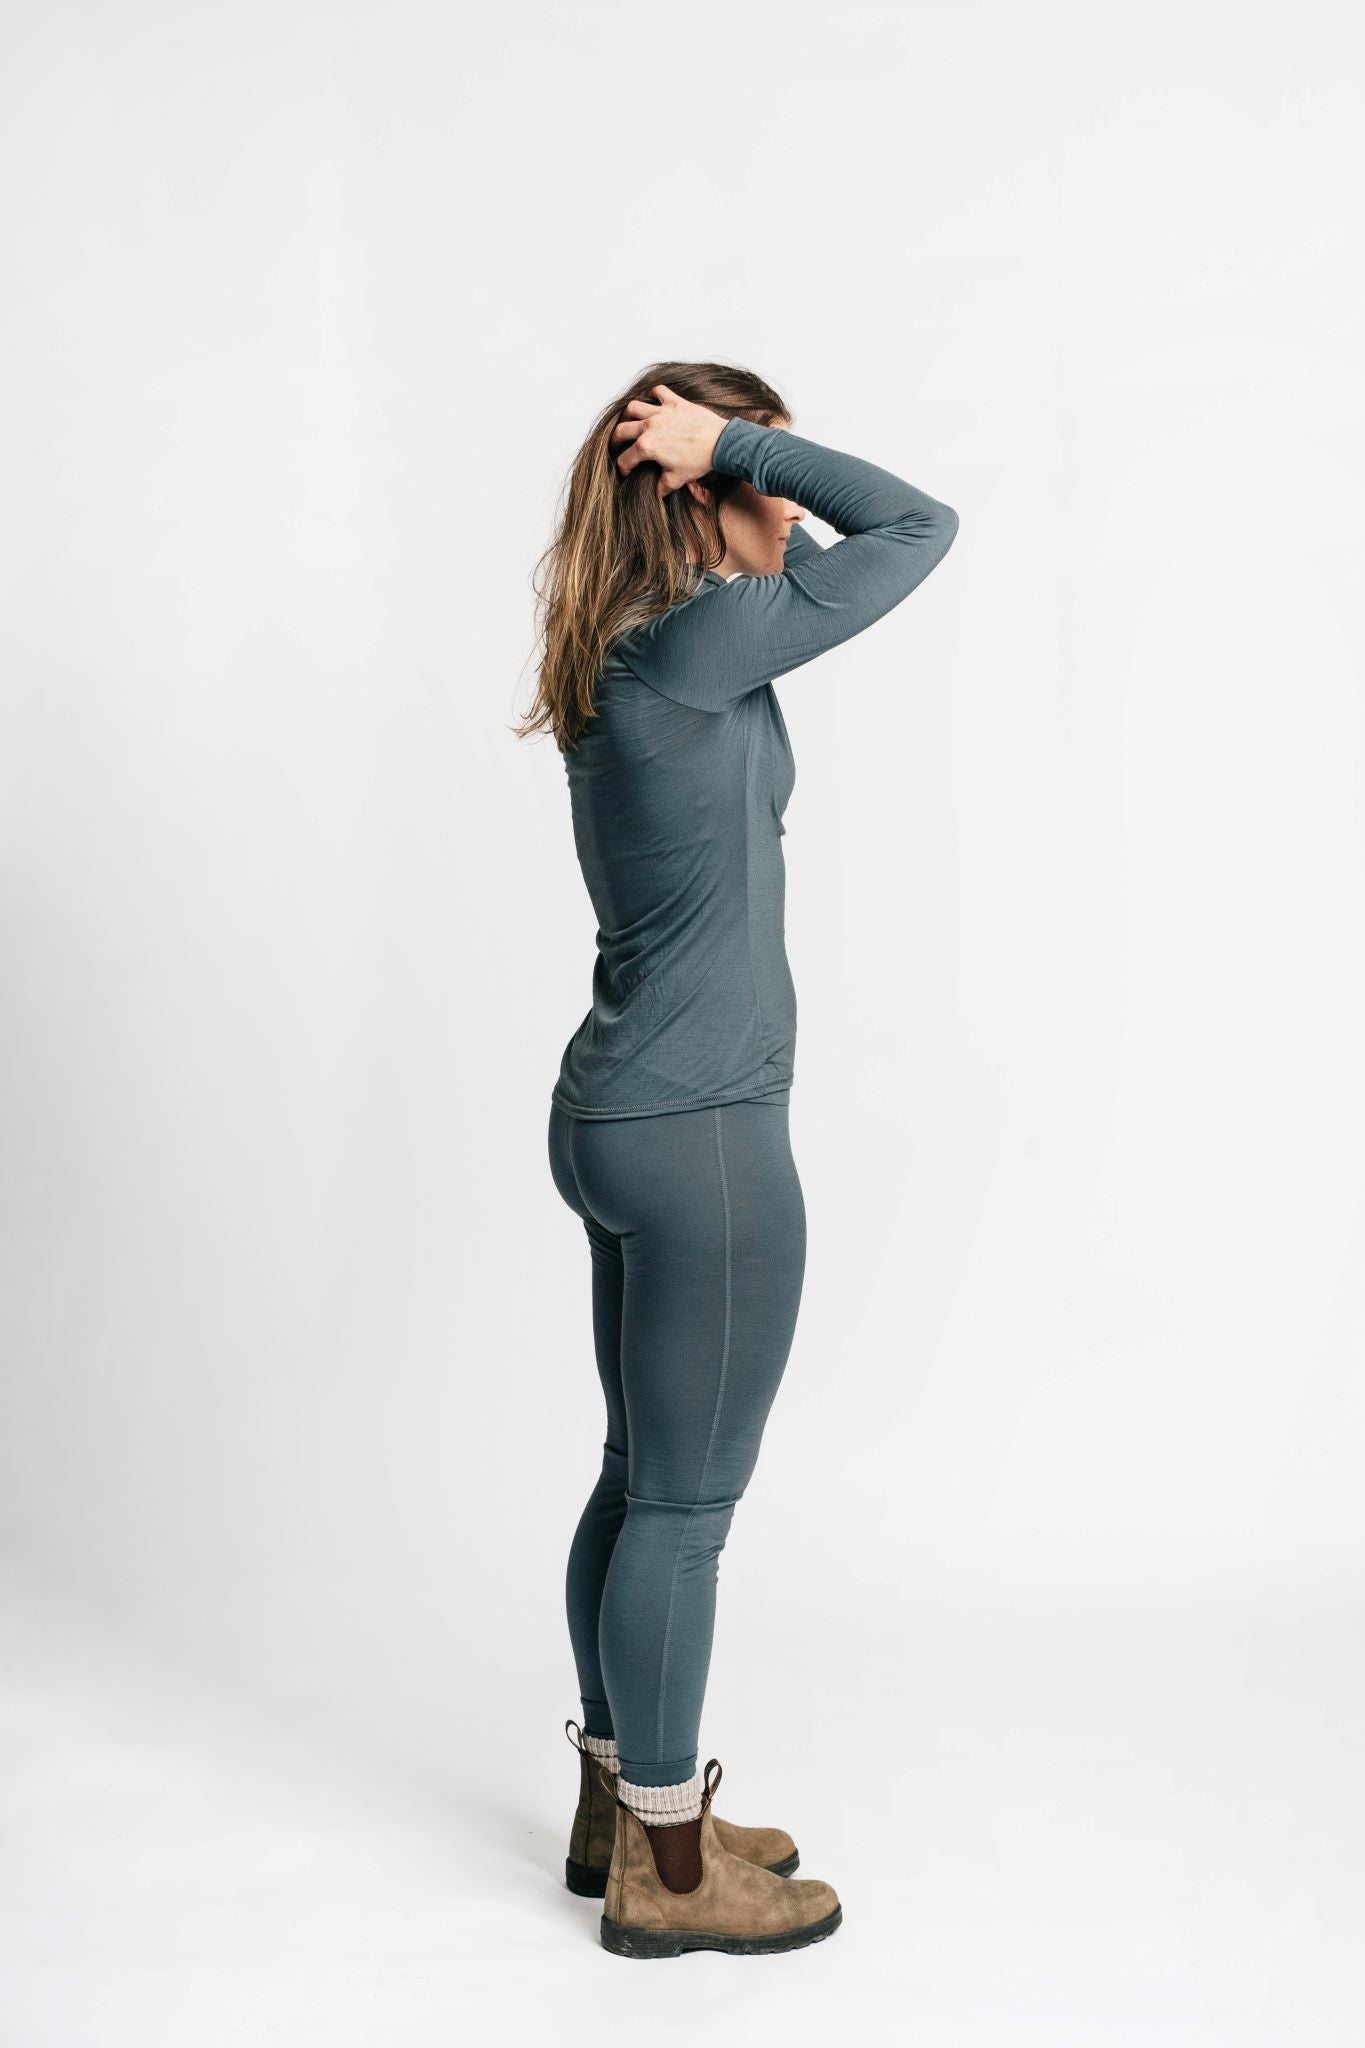 alpine fit merino base layer top and bottom on model from side